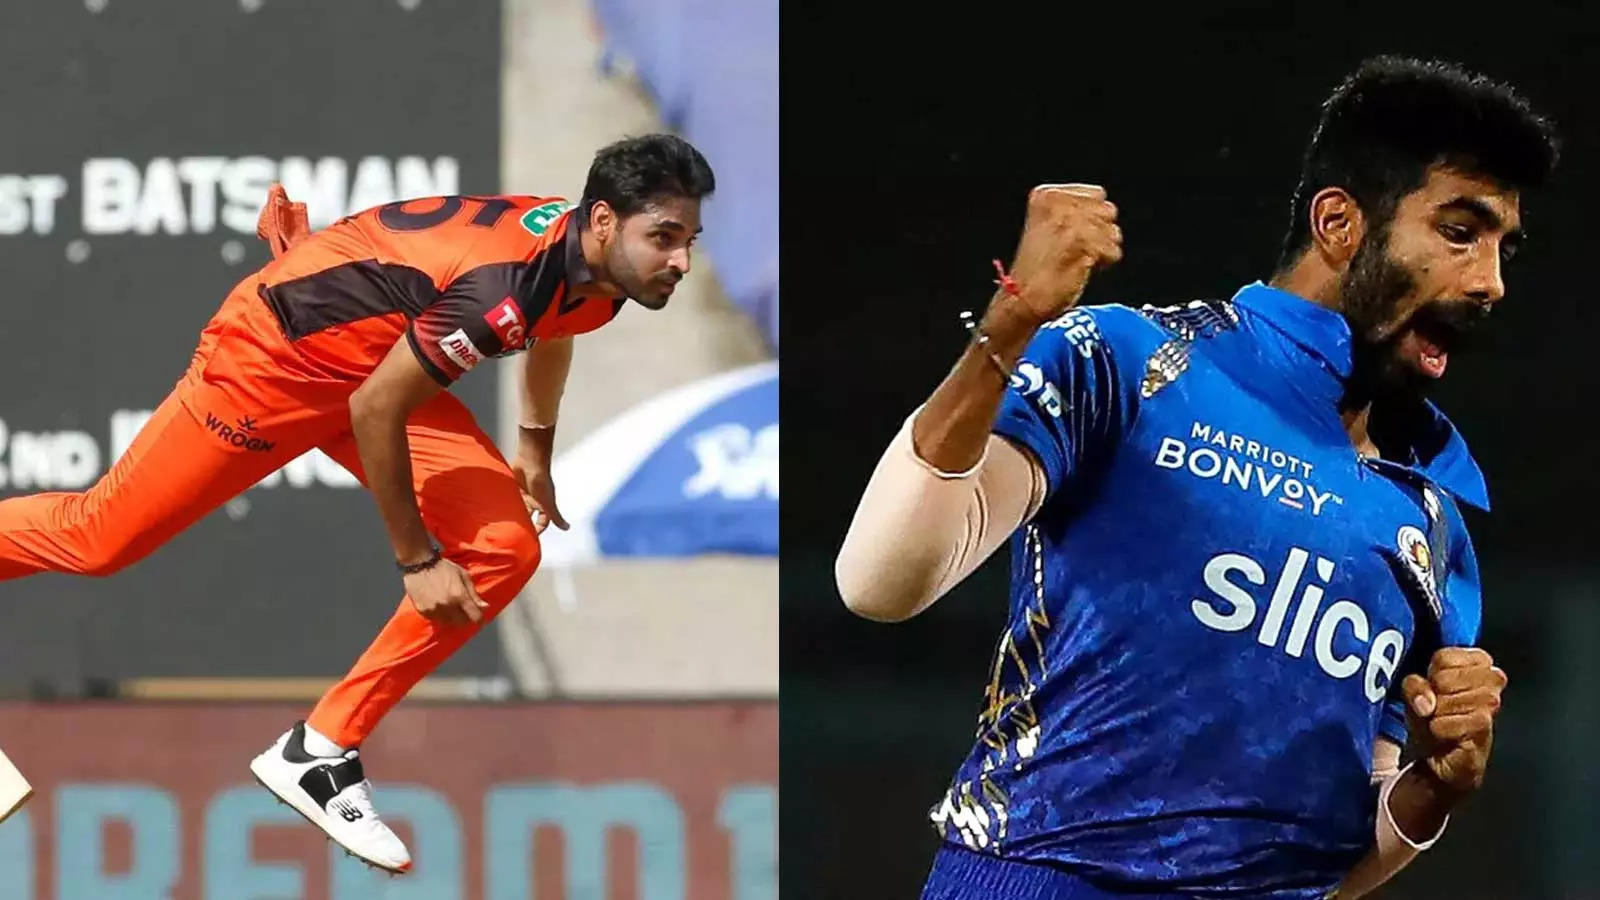 Bhuvneshwar Kumar aced the yorkers competition with Jasprit Bumrah